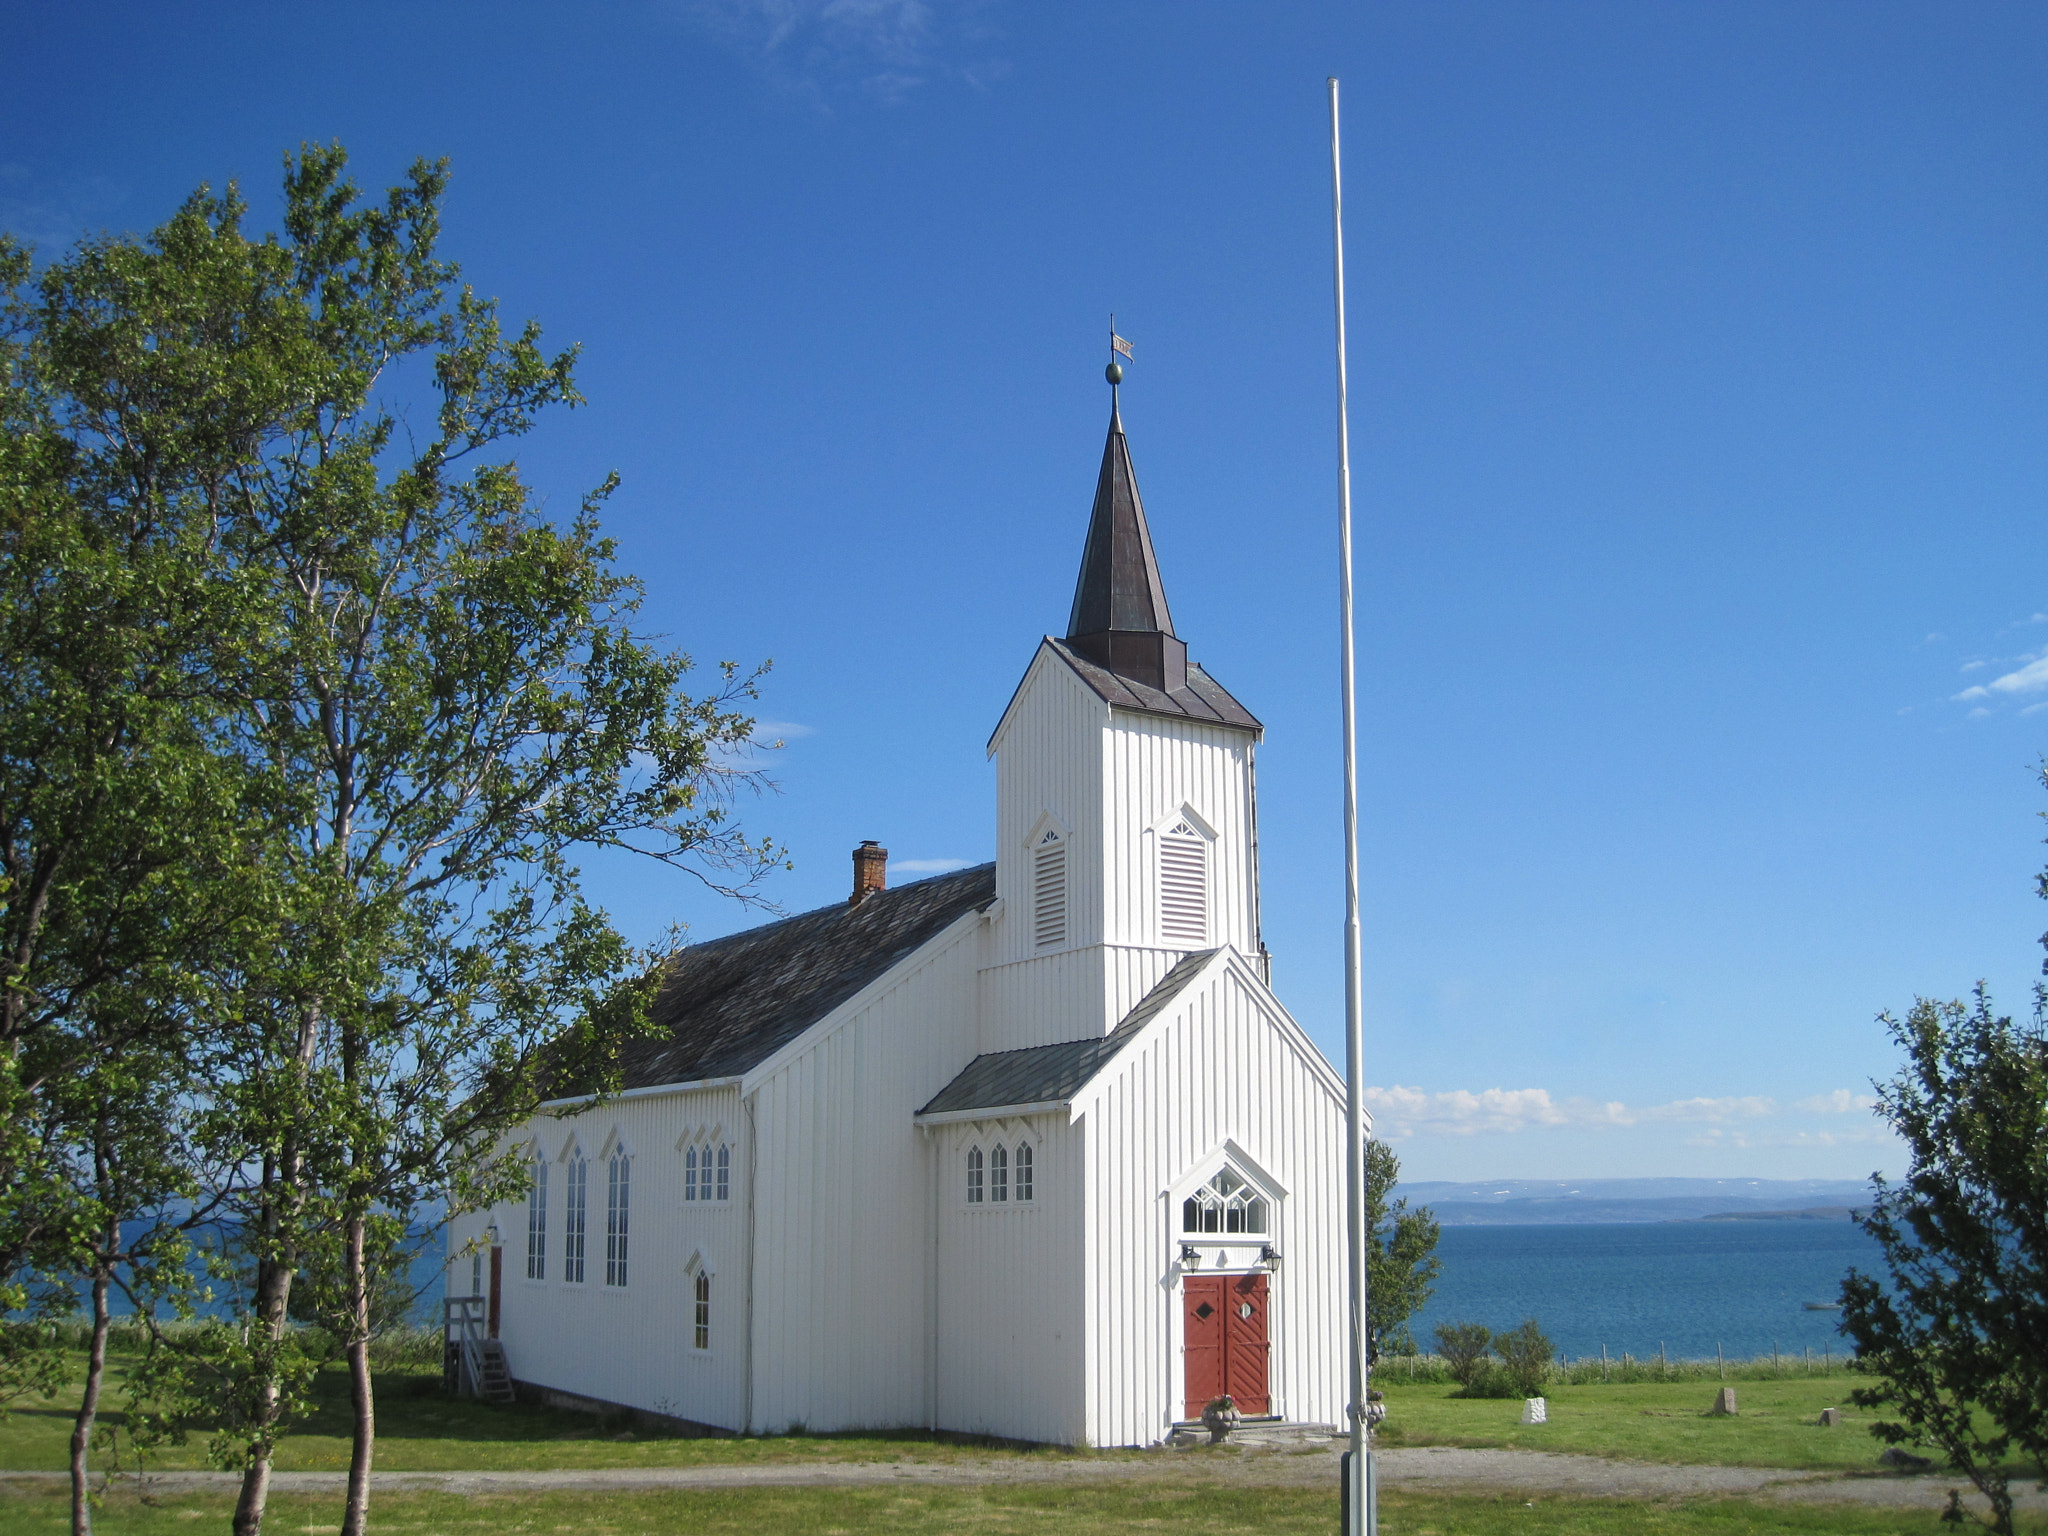 Canon PowerShot SD1200 IS (Digital IXUS 95 IS / IXY Digital 110 IS) sample photo. Church in northern norway. photography